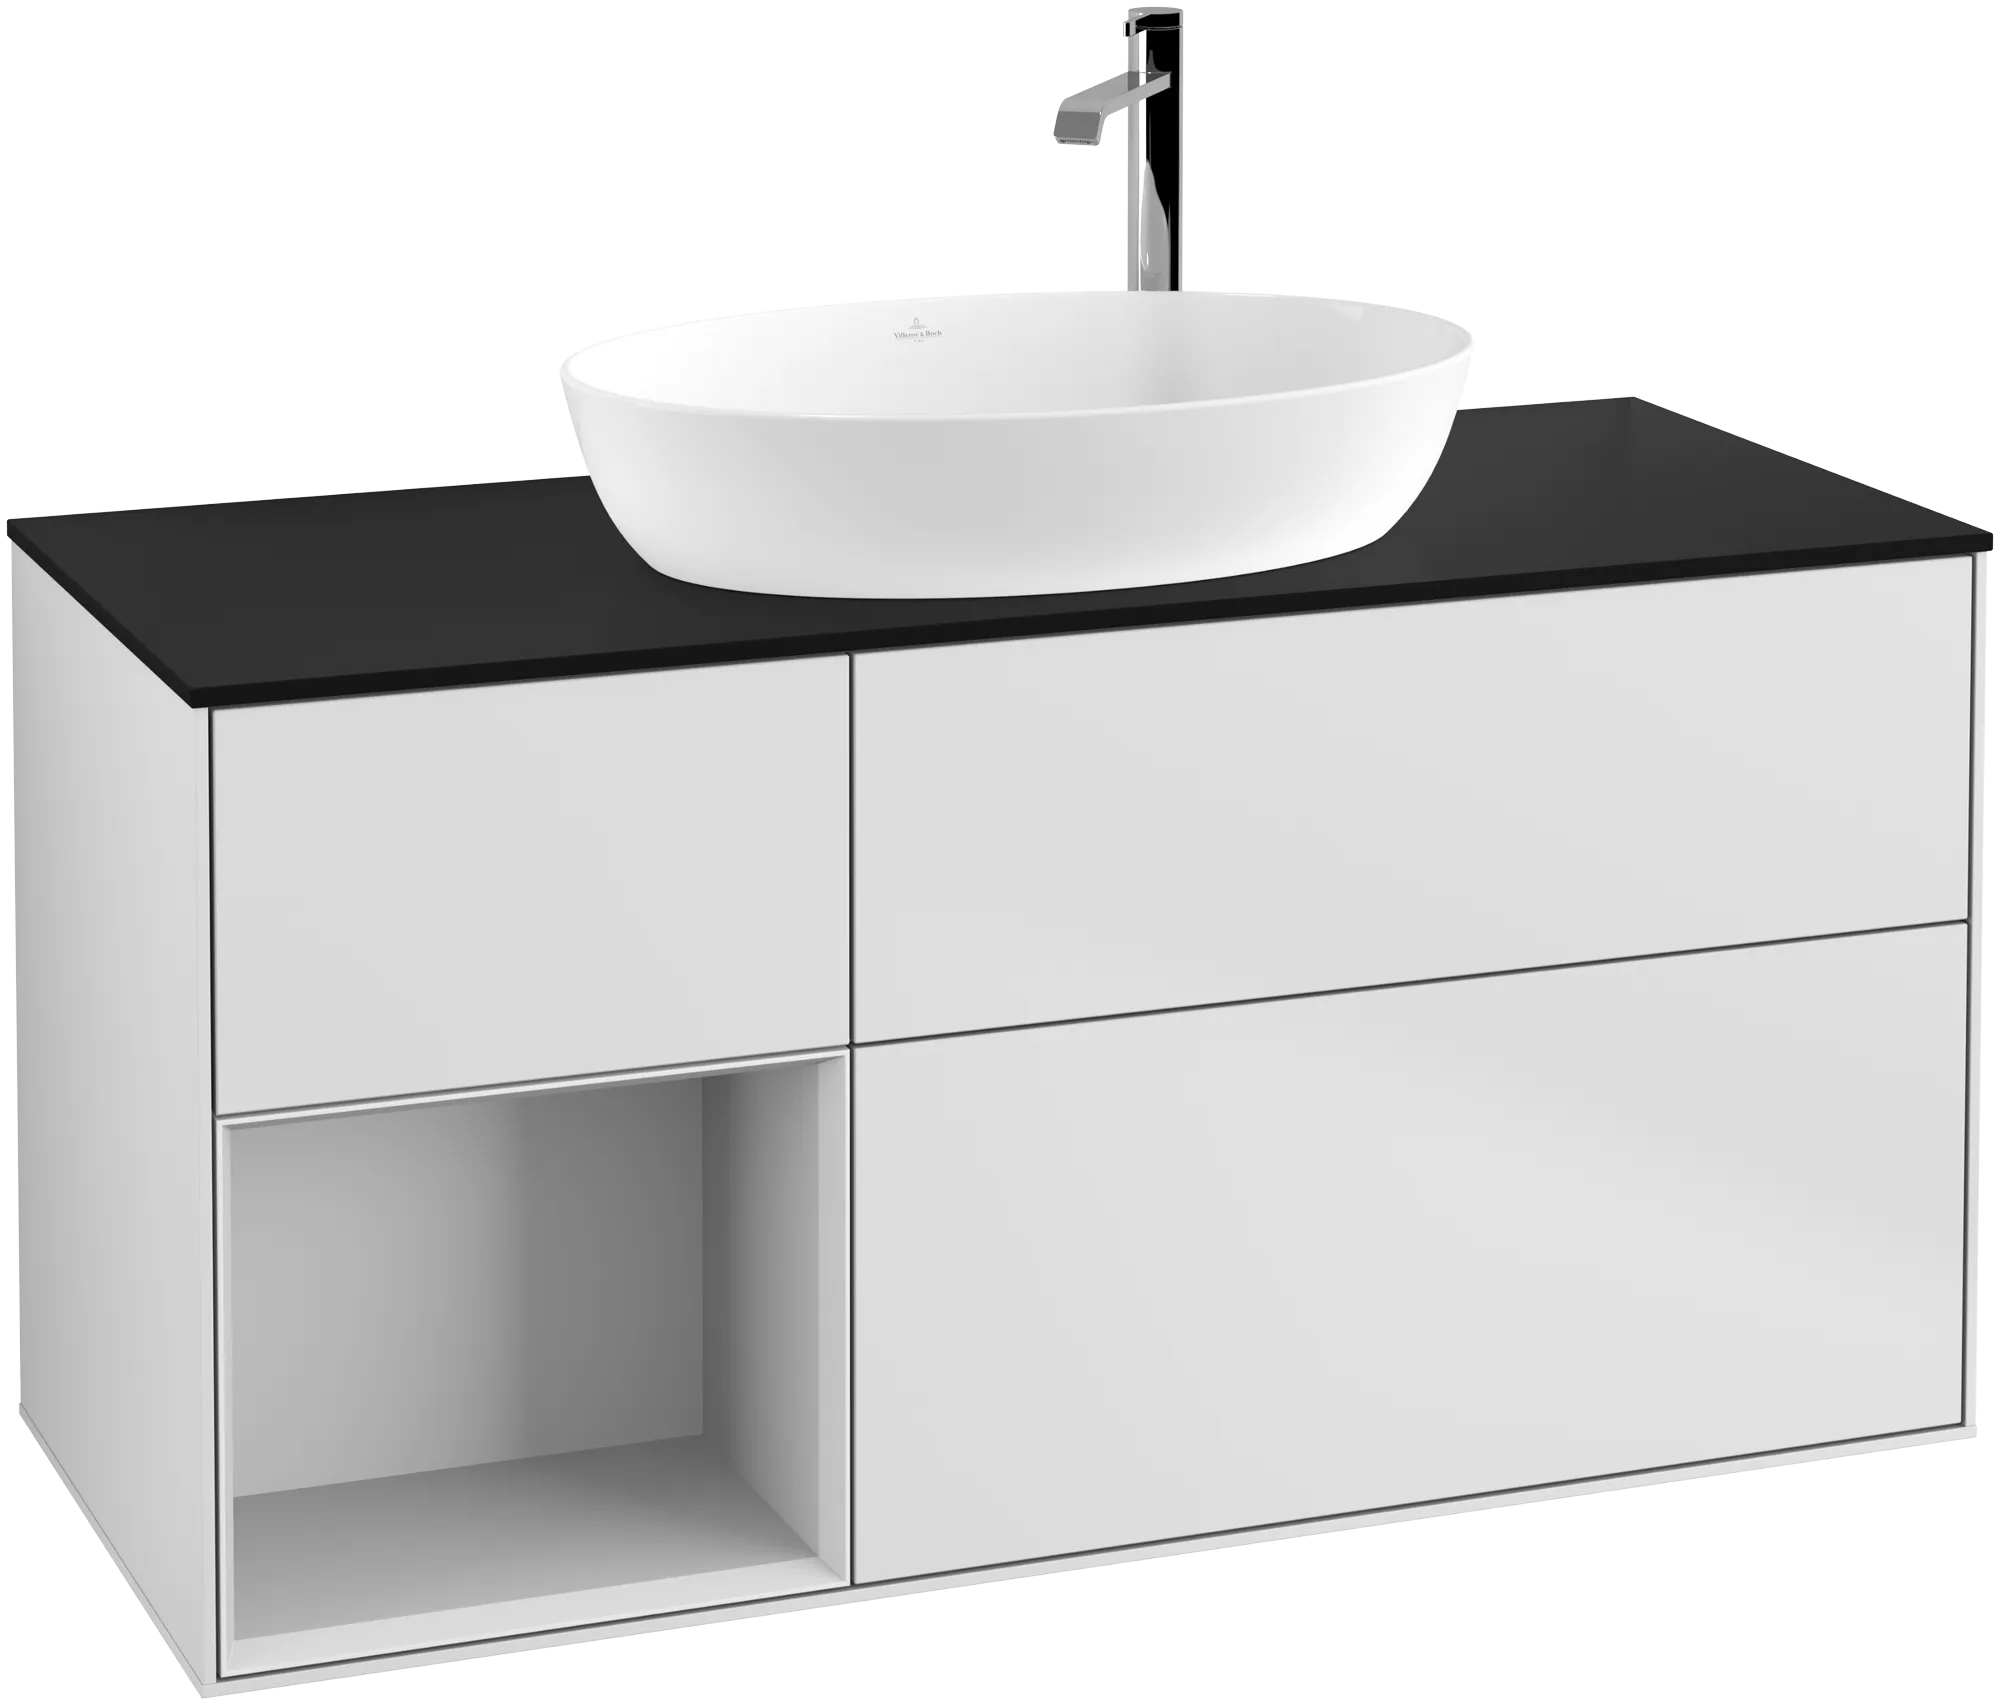 Picture of VILLEROY BOCH Finion Vanity unit, with lighting, 3 pull-out compartments, 1200 x 603 x 501 mm, White Matt Lacquer / White Matt Lacquer / Glass Black Matt #G942MTMT